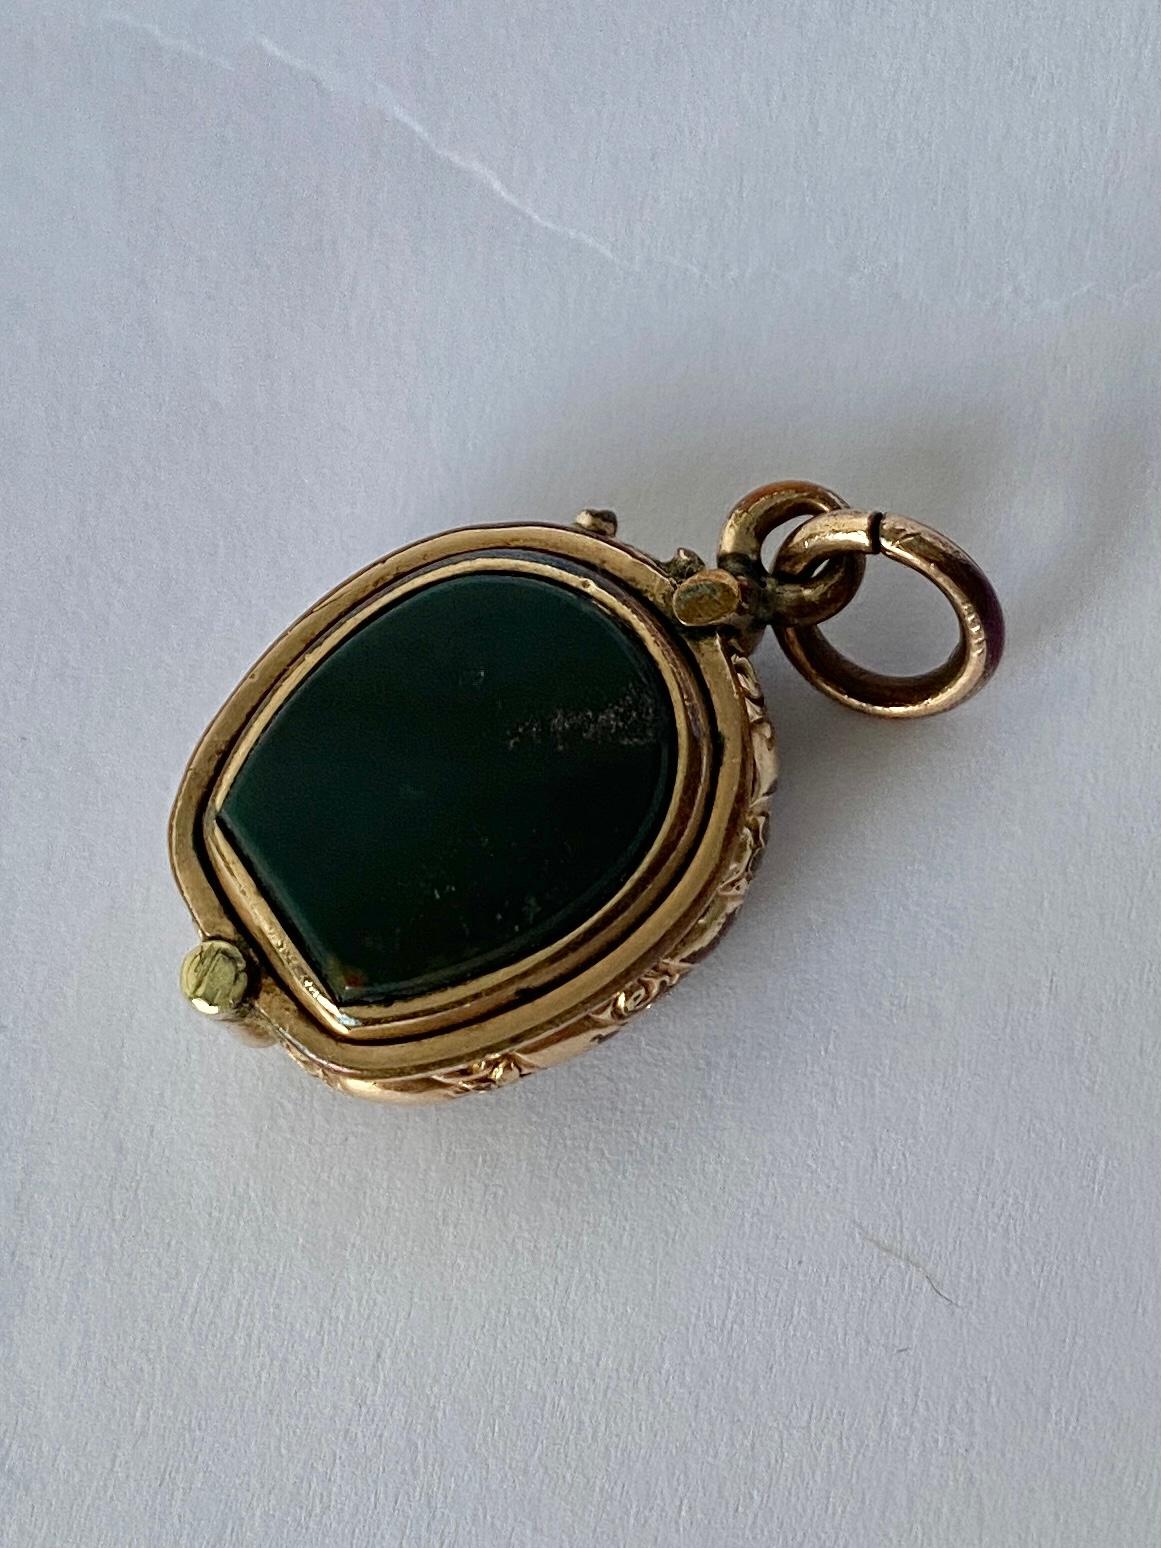 This classic 9ct gold fob holds a carnelian and bloodstone but the unusual element is that it is actually a locket! As you can see the locket has a slide opening and reveals a secret compartment to put a loved ones photo or lock of hair. 

Stone